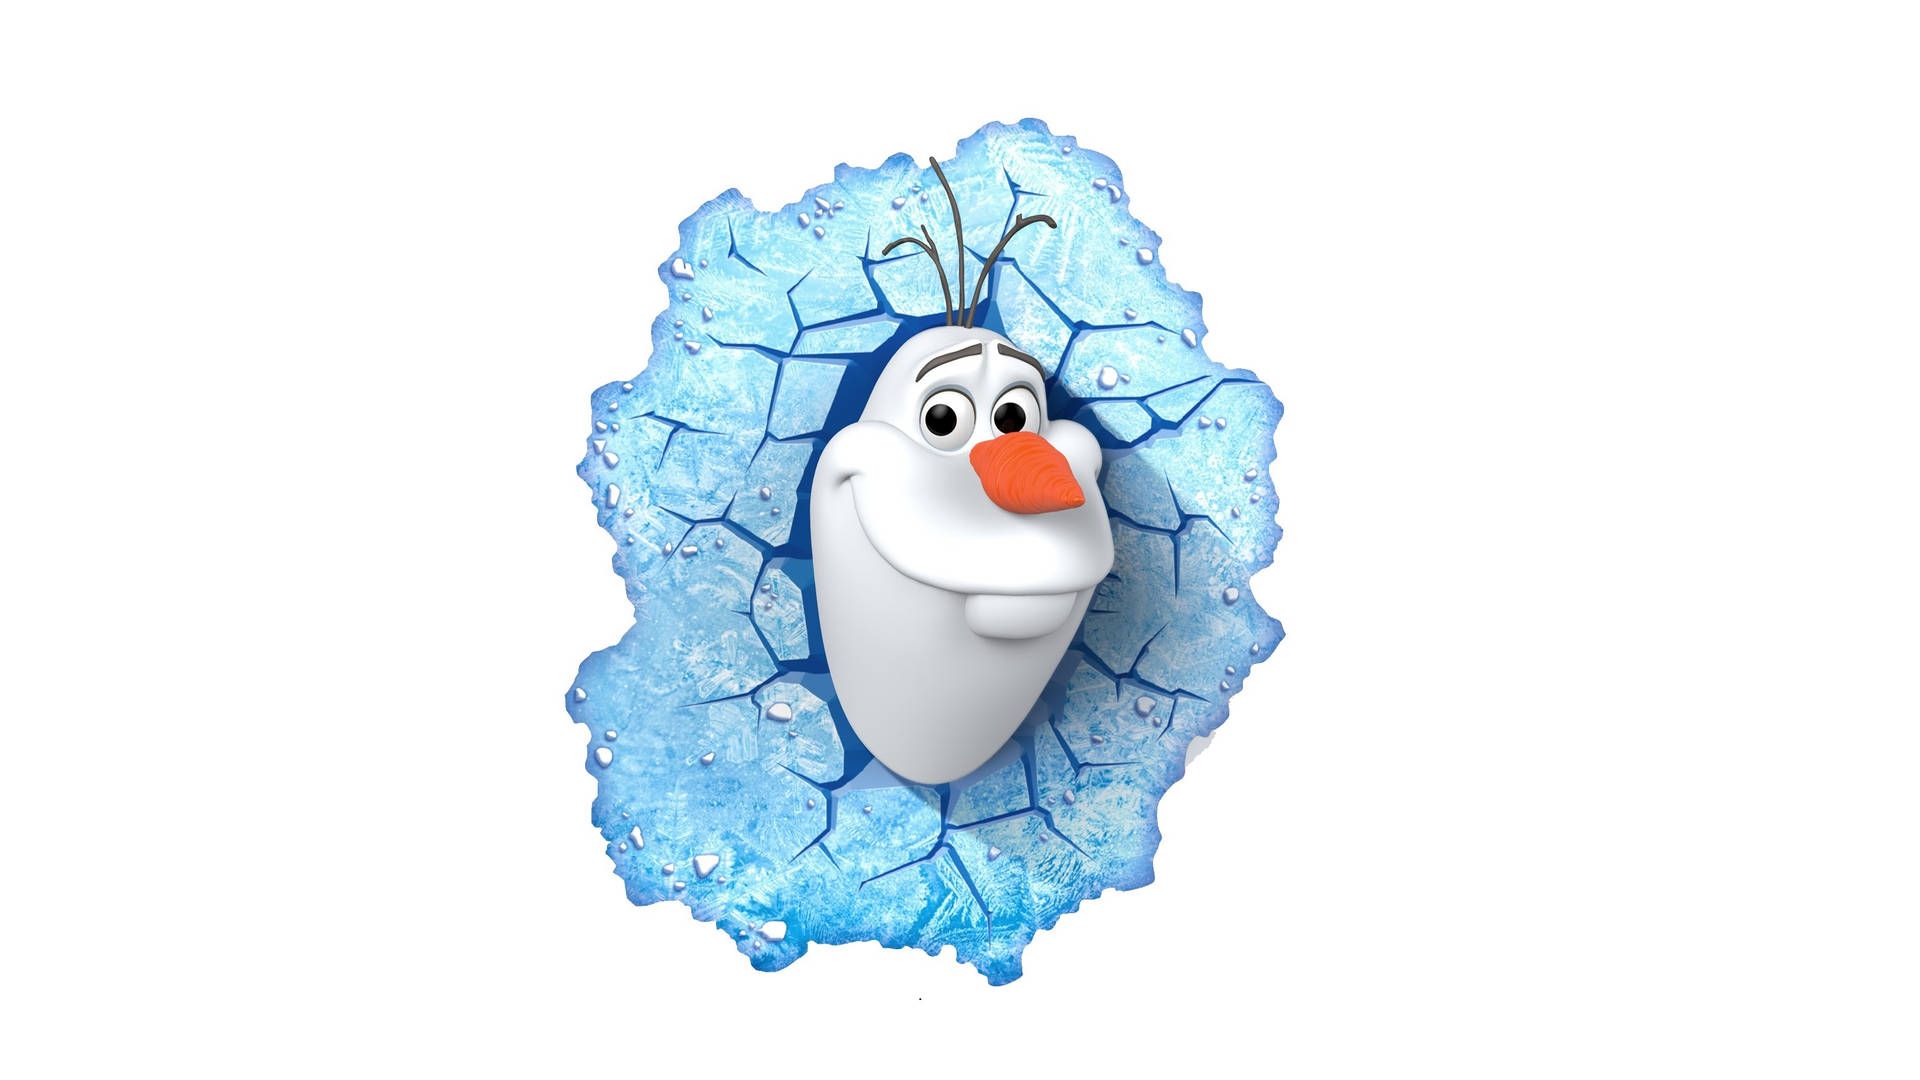 Free Olaf Wallpaper Downloads, Olaf Wallpaper for FREE